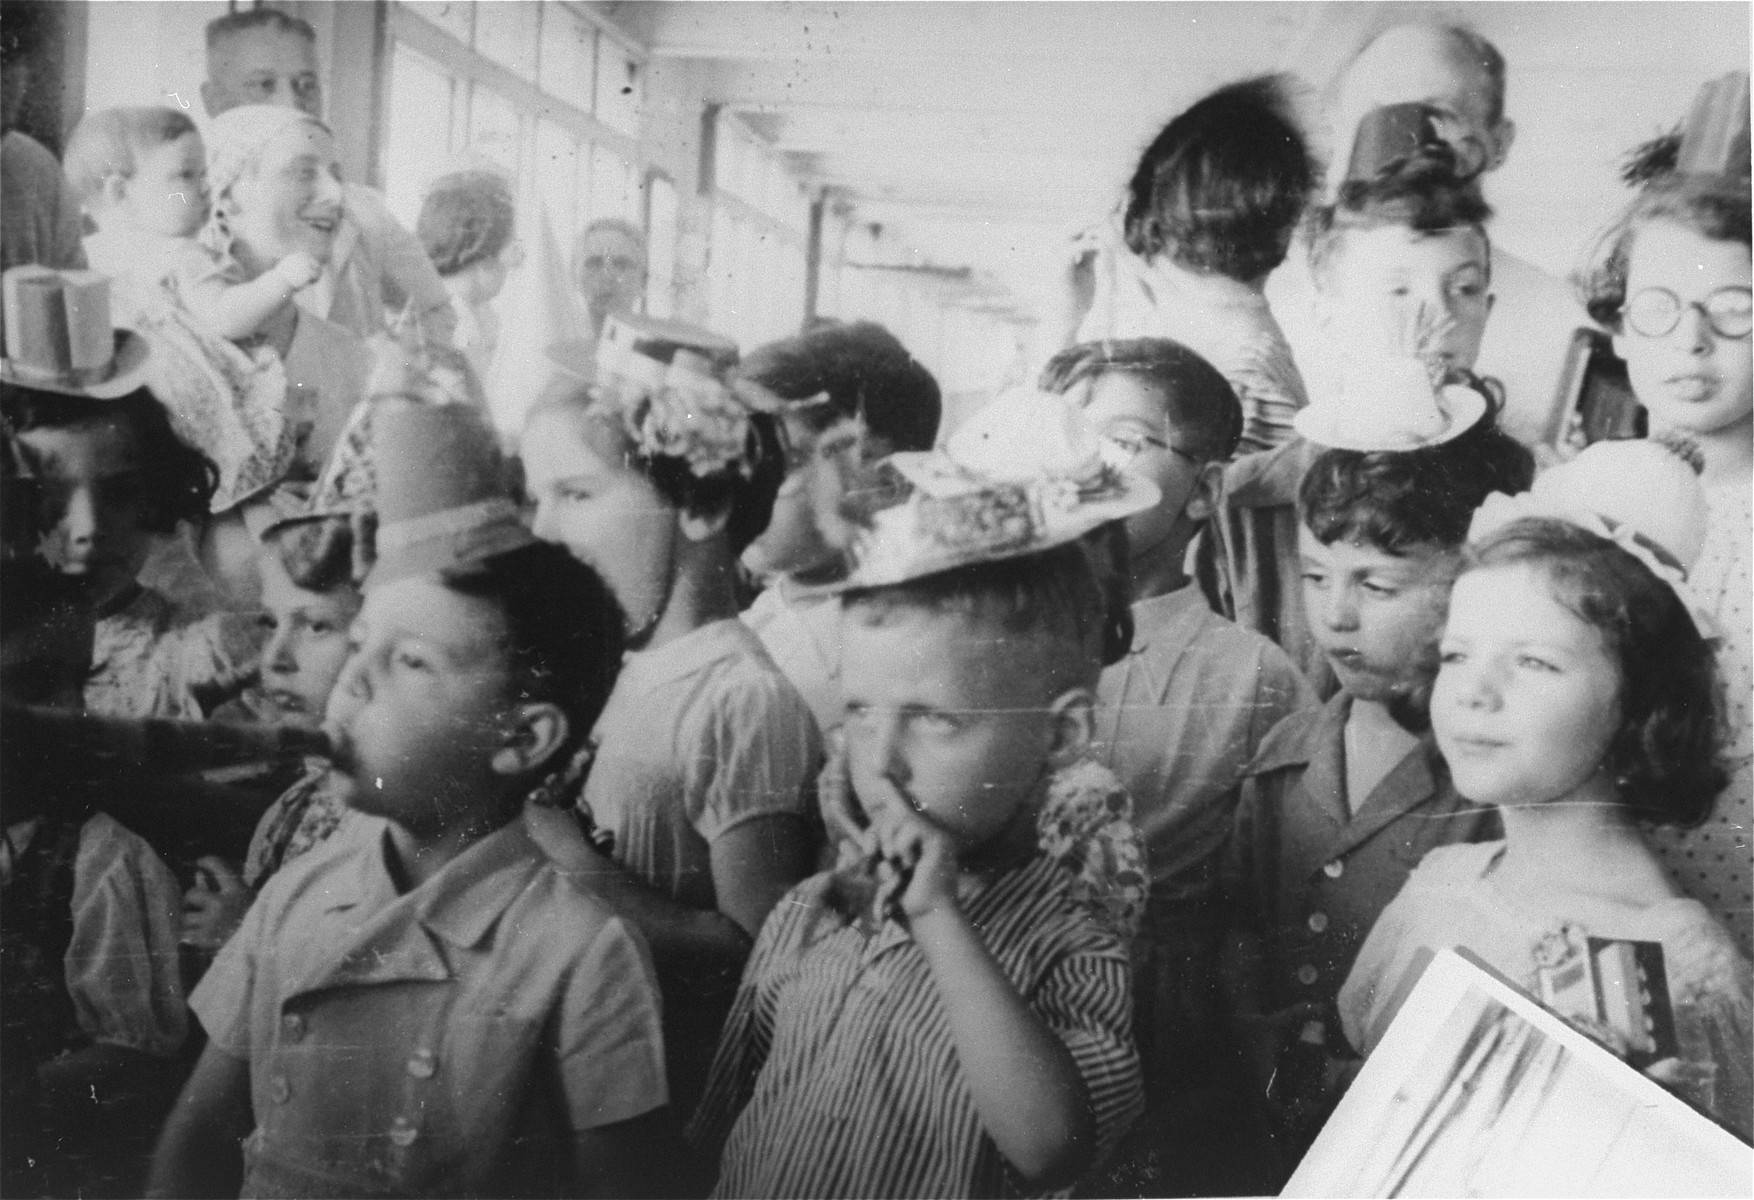 Children's party on board the St. Louis. The boy on the right wearing a small white hat is Rolf Altschul. Directly behind him is Gerd Altschul.  Hildegarde Wolff is in the lower right-hand corner.

Photo from the personal St. Louis photo album assembled by the donor's mother, Lotte Altschul.